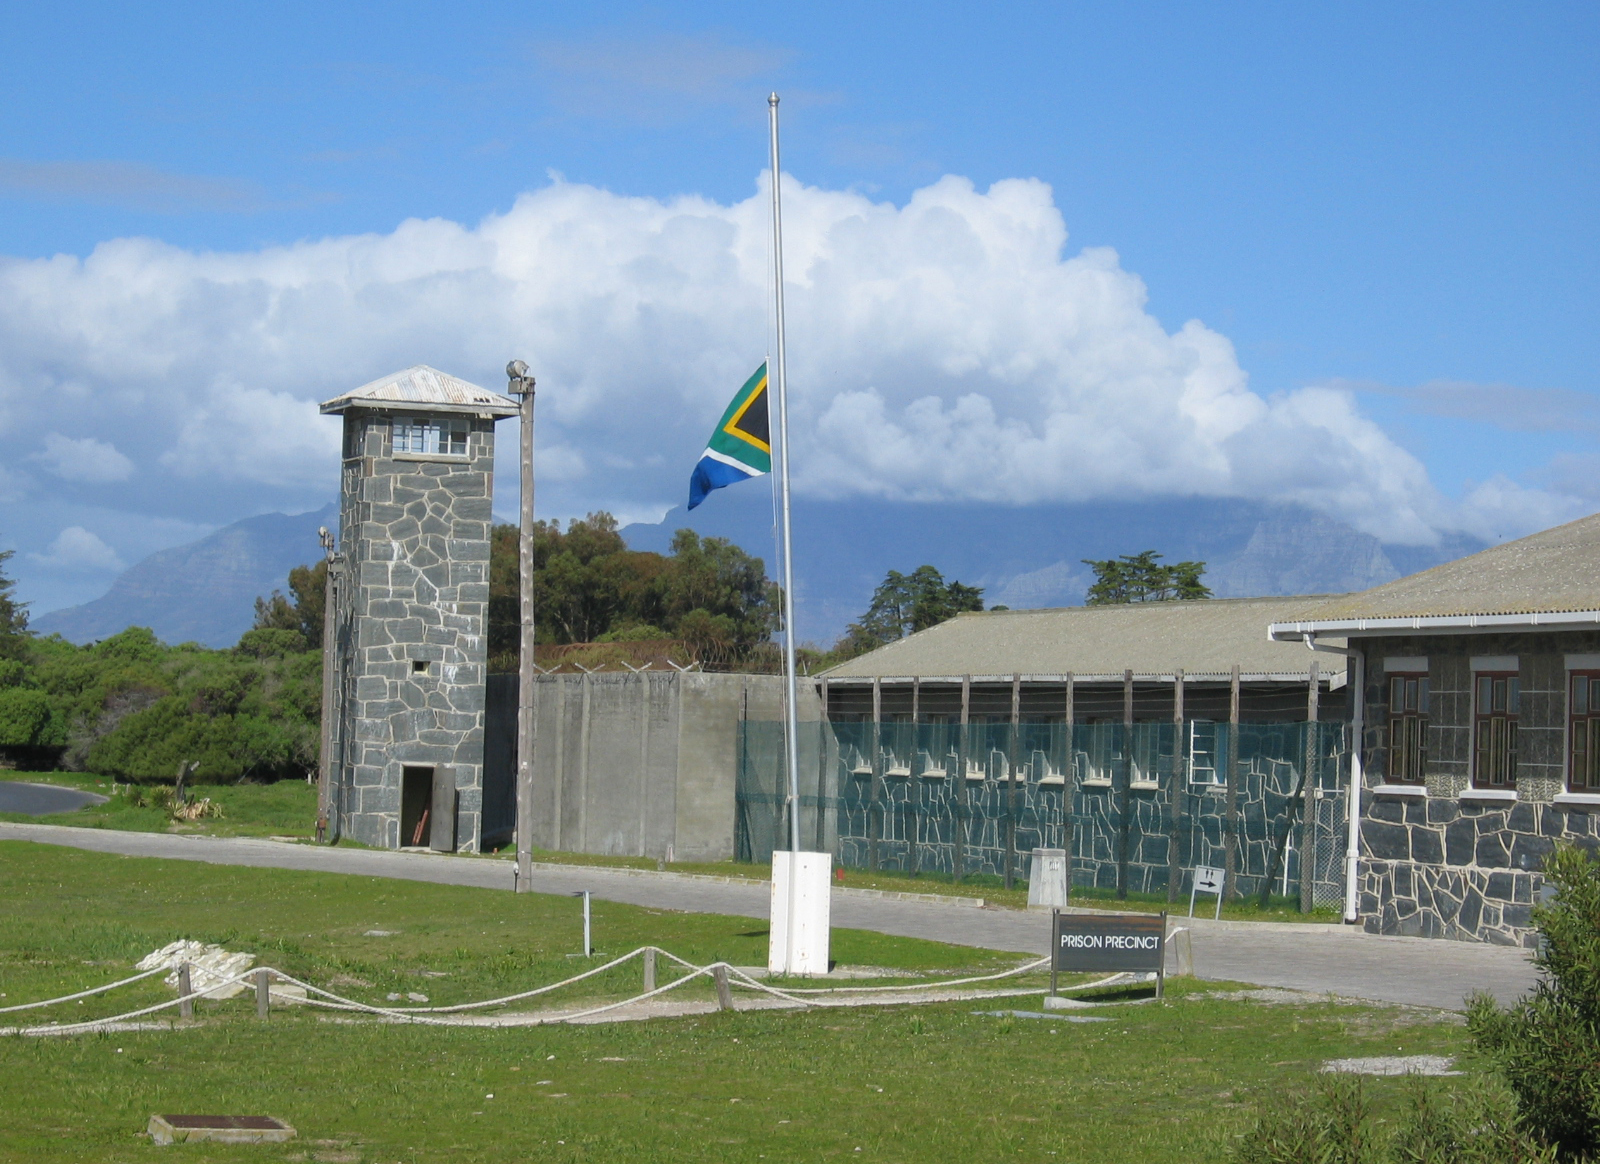 Day 5: ROBBEN ISLAND - CAPE TOWN TOWNSHIPS TOUR